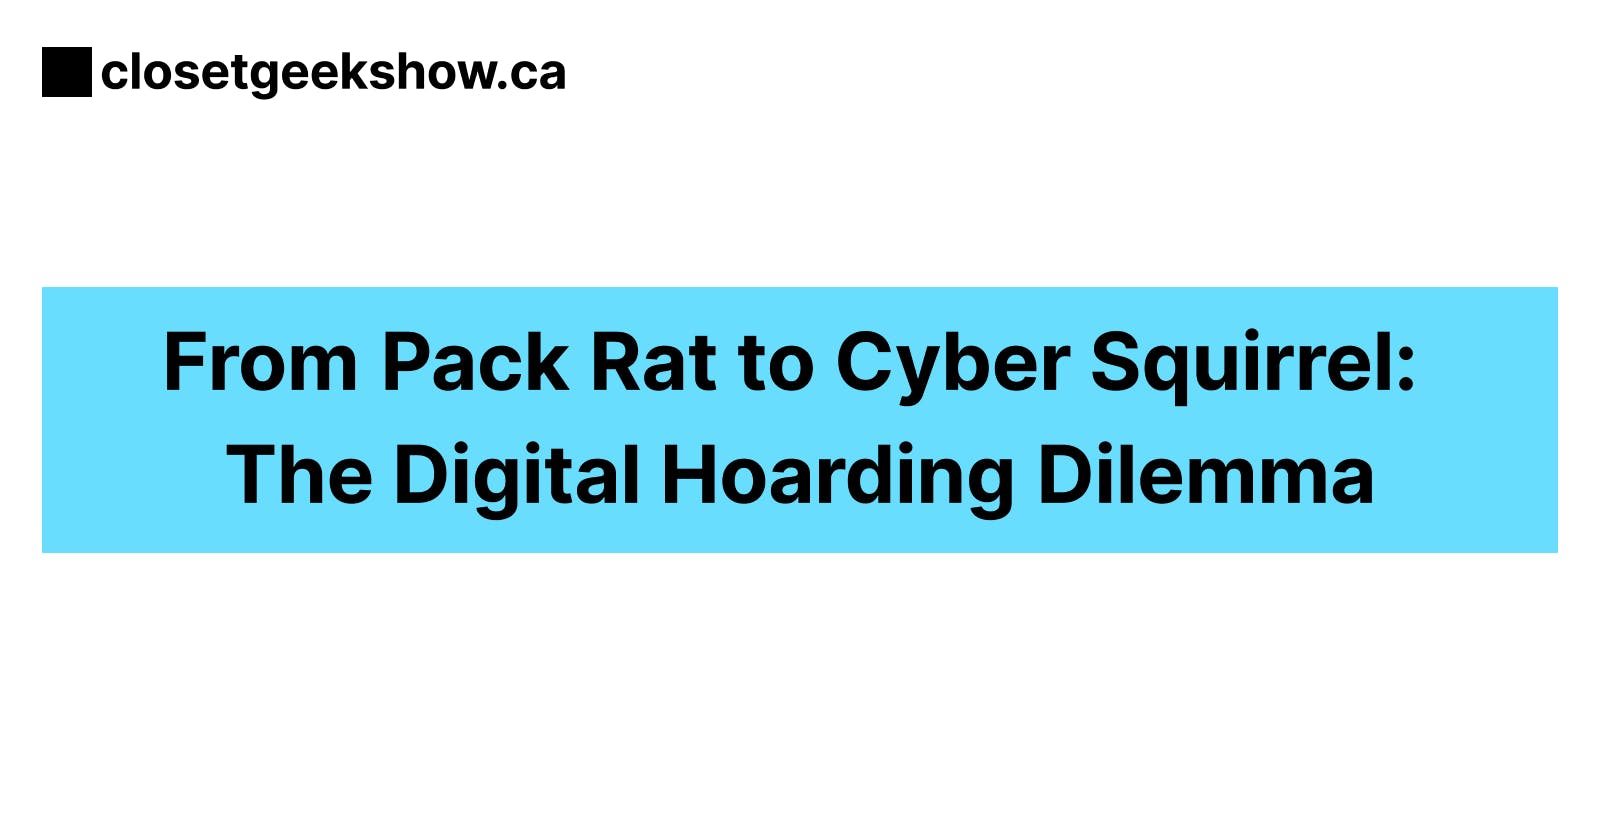 From Pack Rat to Cyber Squirrel